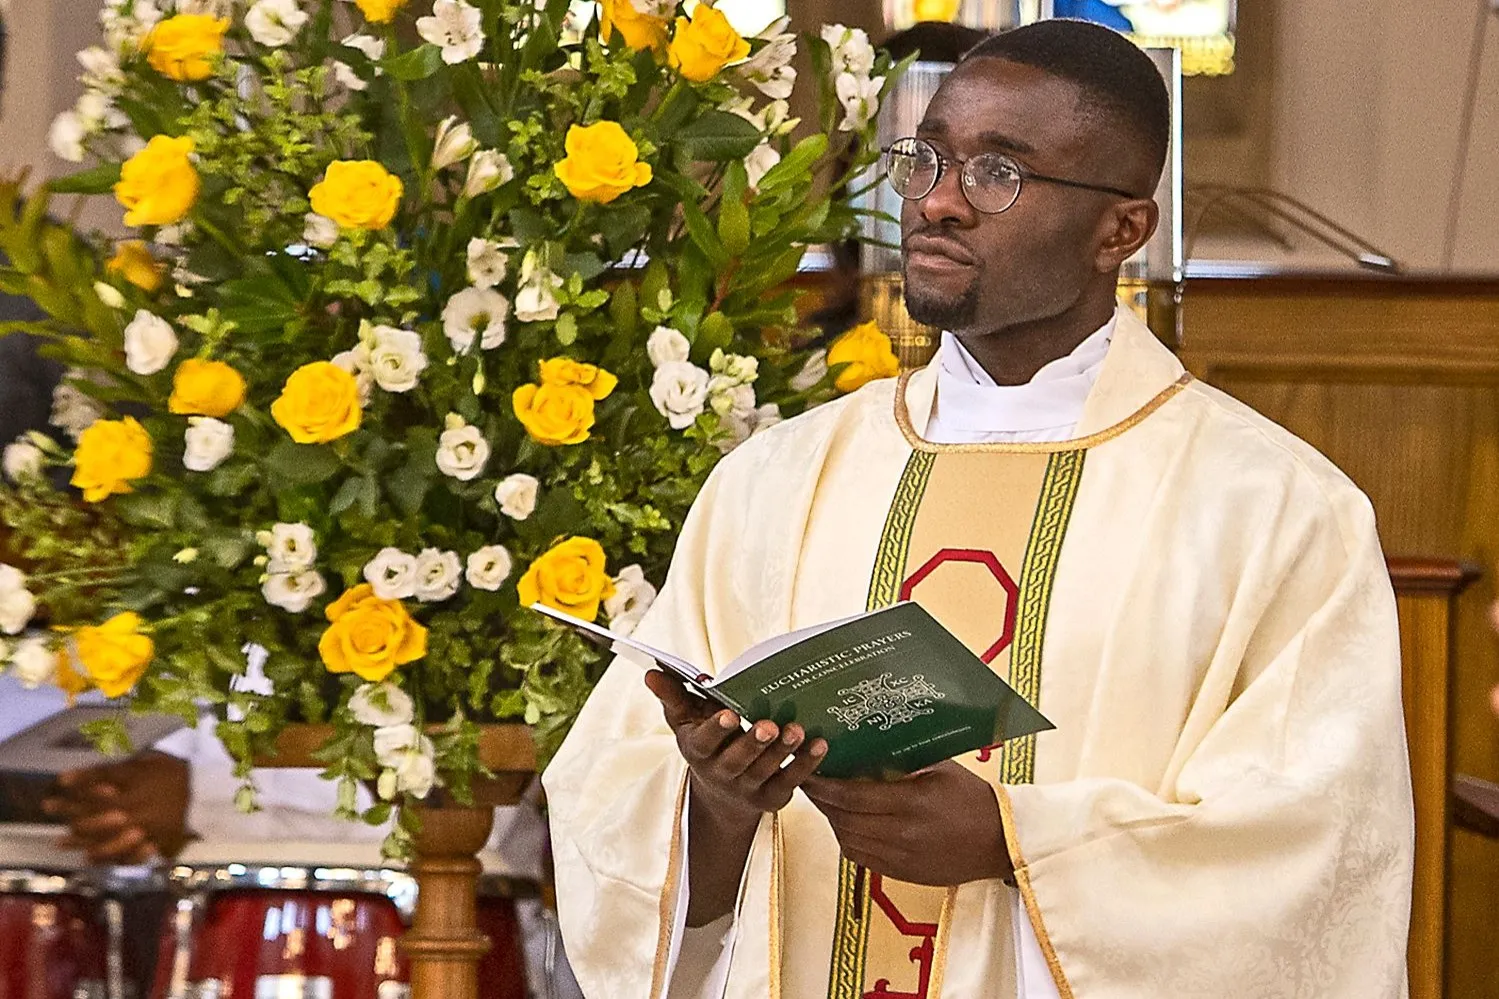 Fr. Paschal Uche at his ordination in Brentwood Cathedral, Essex, England, Aug. 1, 2020. Ordination photo ?w=200&h=150